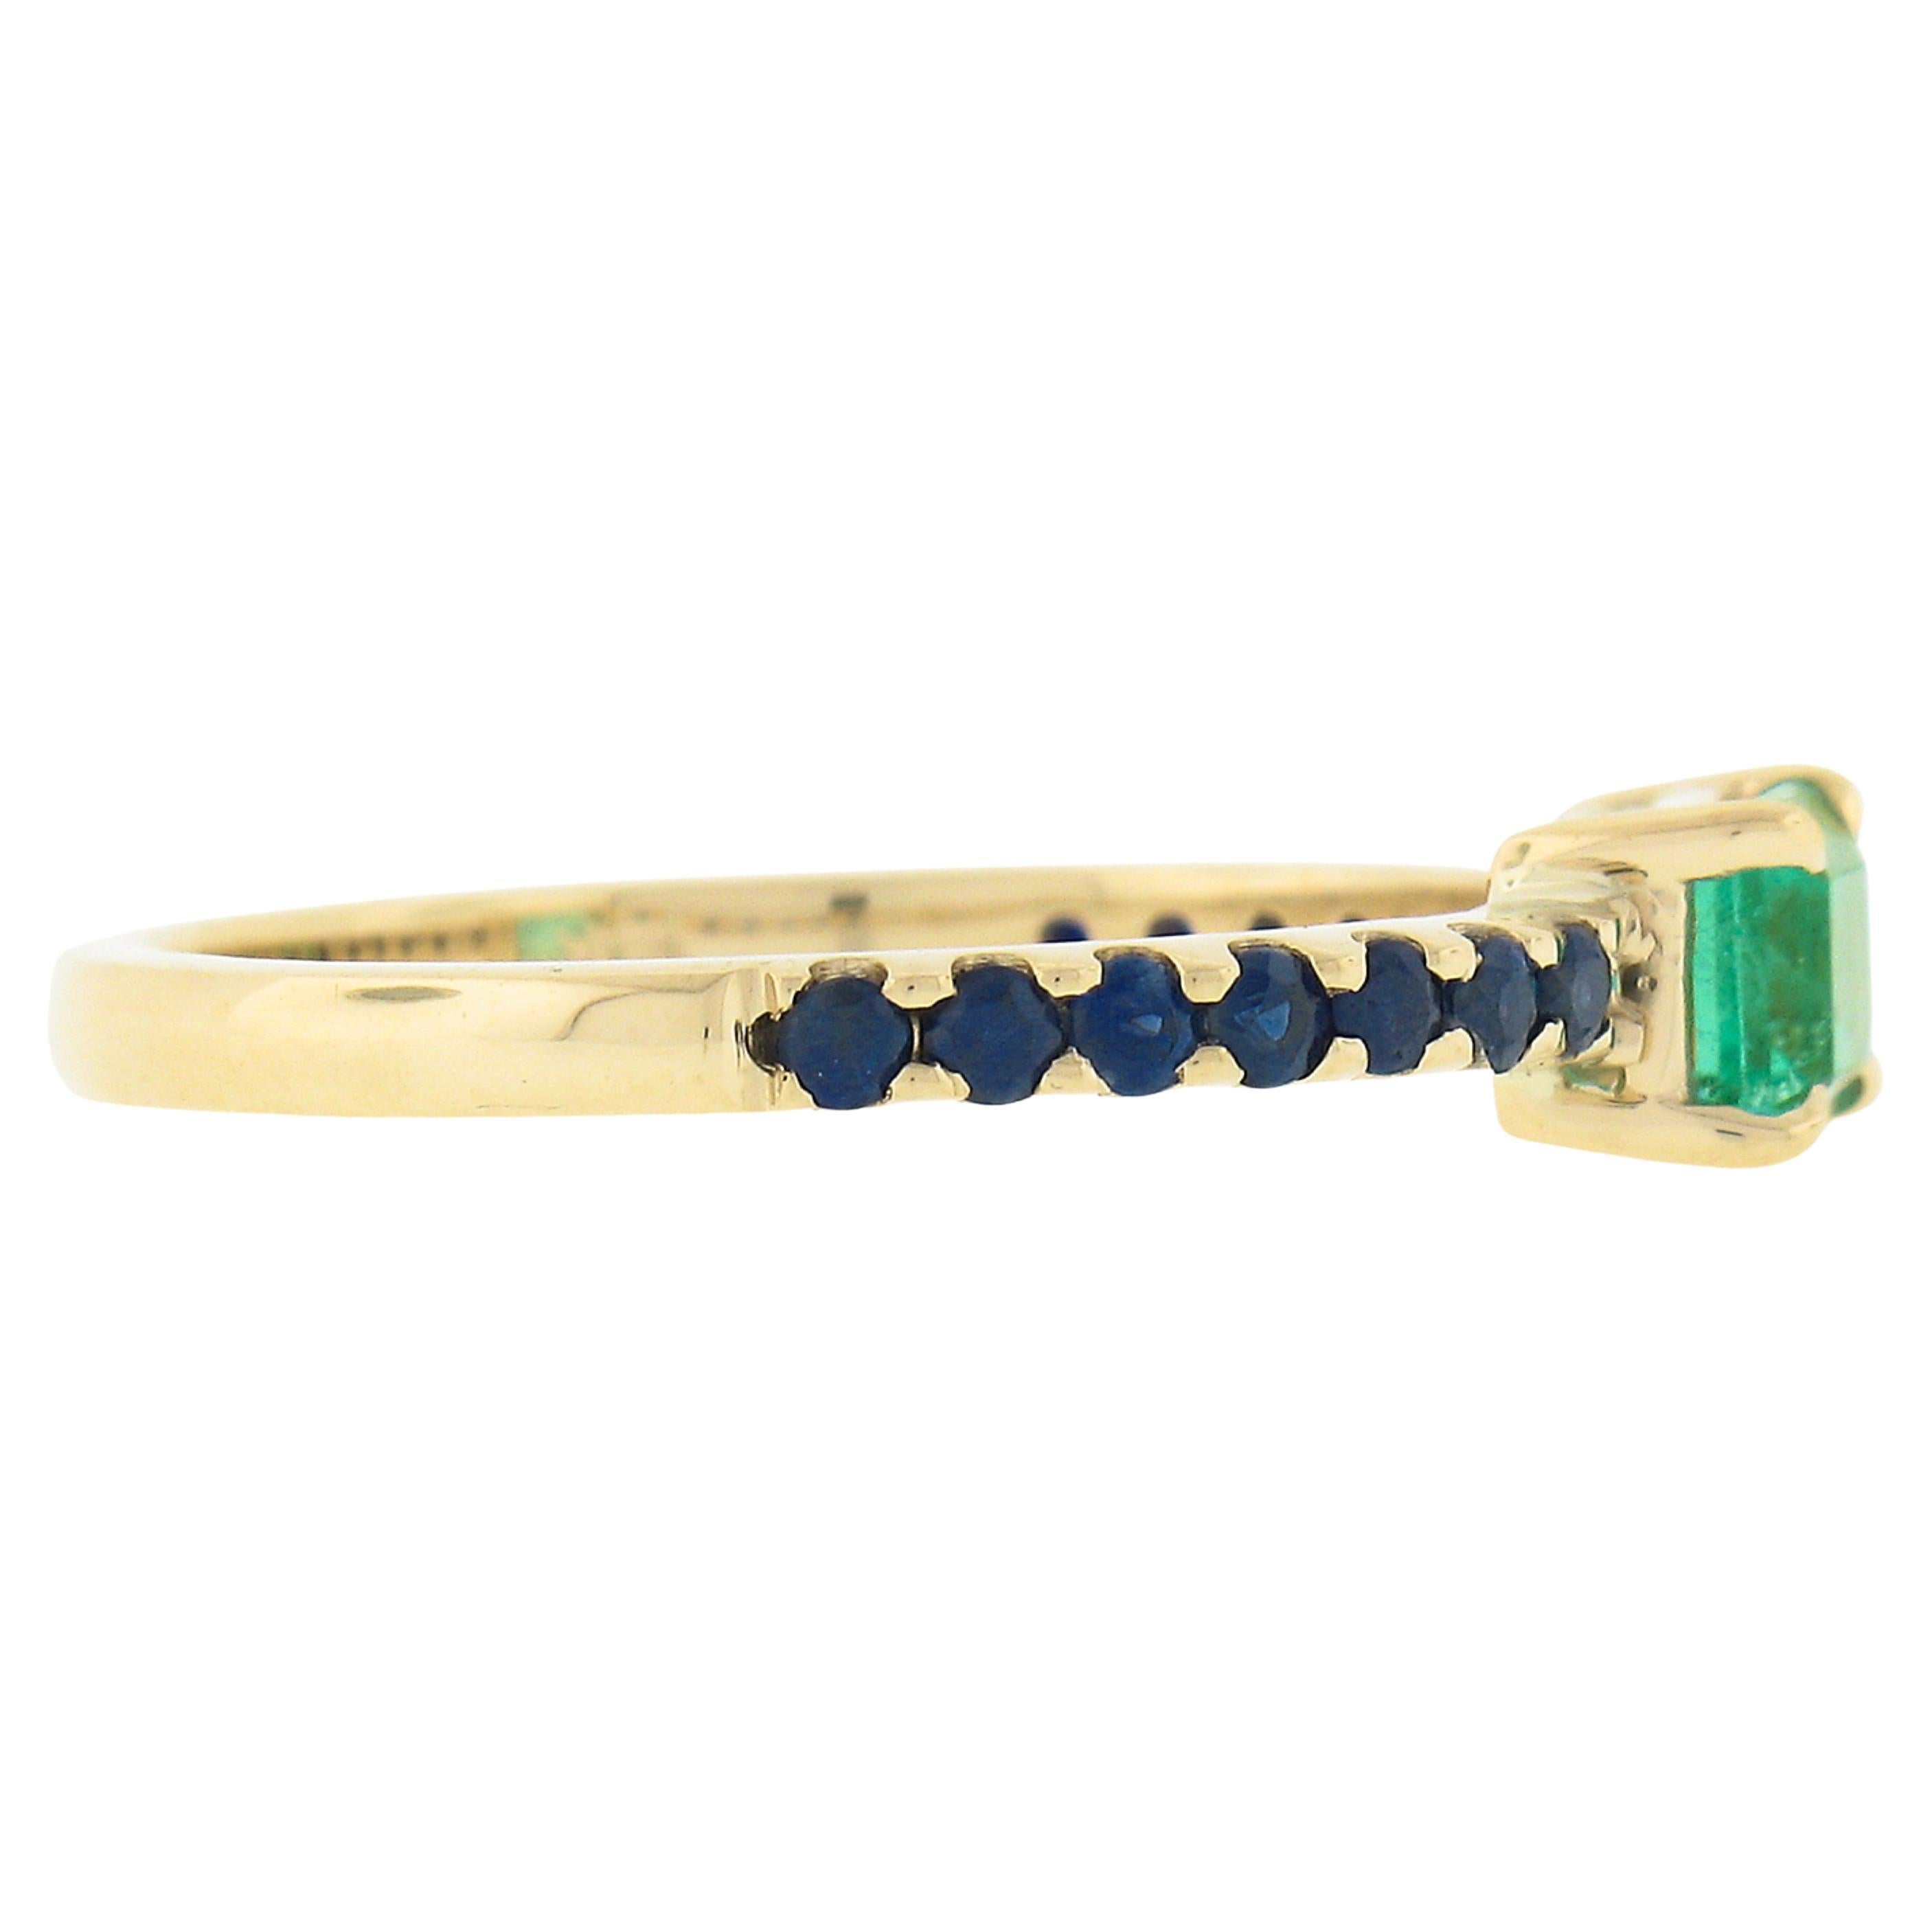 A simple yet gorgeous, Colombian emerald solitaire ring that is newly crafted from solid 14k yellow gold. The solitaire is emerald cut with a medium vibrant green color accented with 15 royal blue sapphires that are all set in prongs settings. This